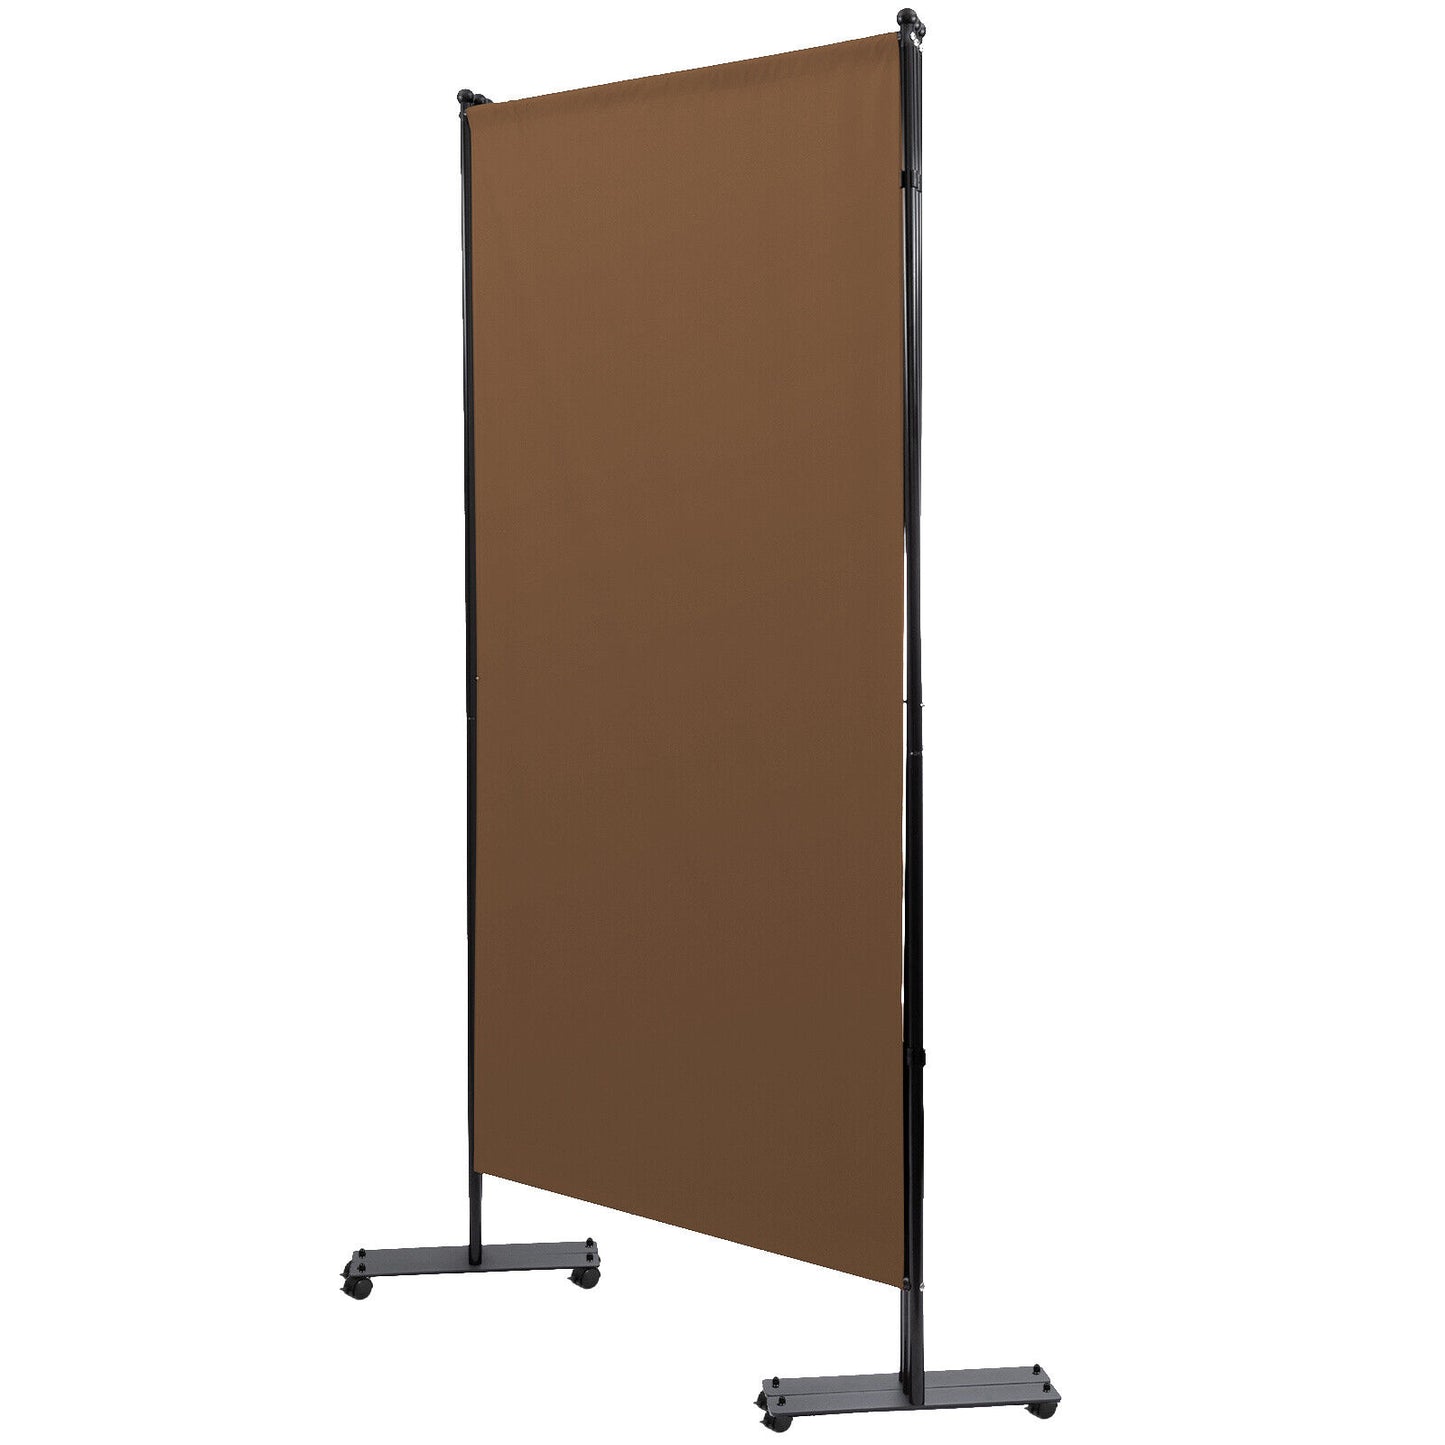 3 Panel Room Divider 9FT Tall Folding Privacy Screen Fabric Office Partition